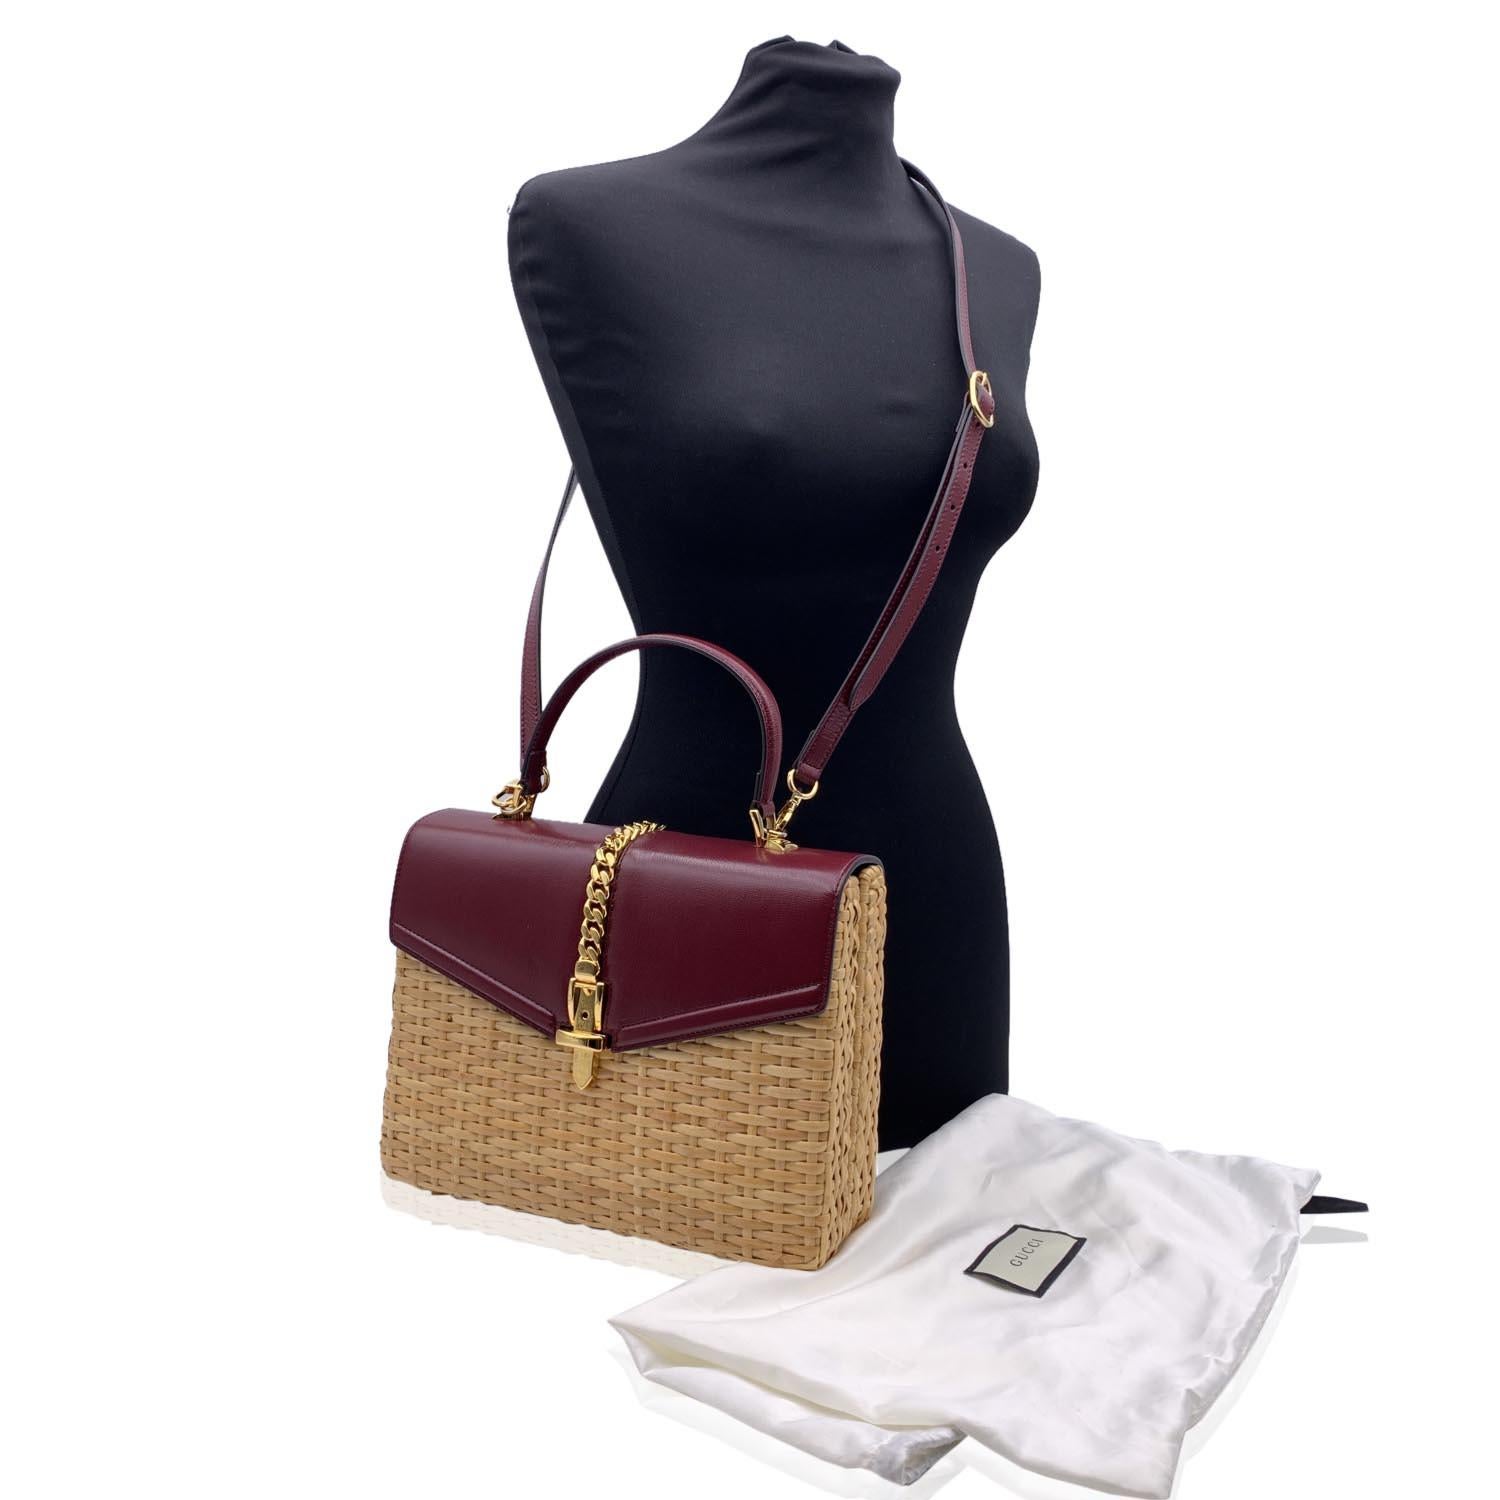 Stunning 'Sylvie' top handle bag by Gucci., from the Pre-Fall 2019 collection. This is the small version of the Sylvie satchel line, now discontinued. It is crafted in beige wicker and smooth burgundy leather with gold metal chuncky chain on top.